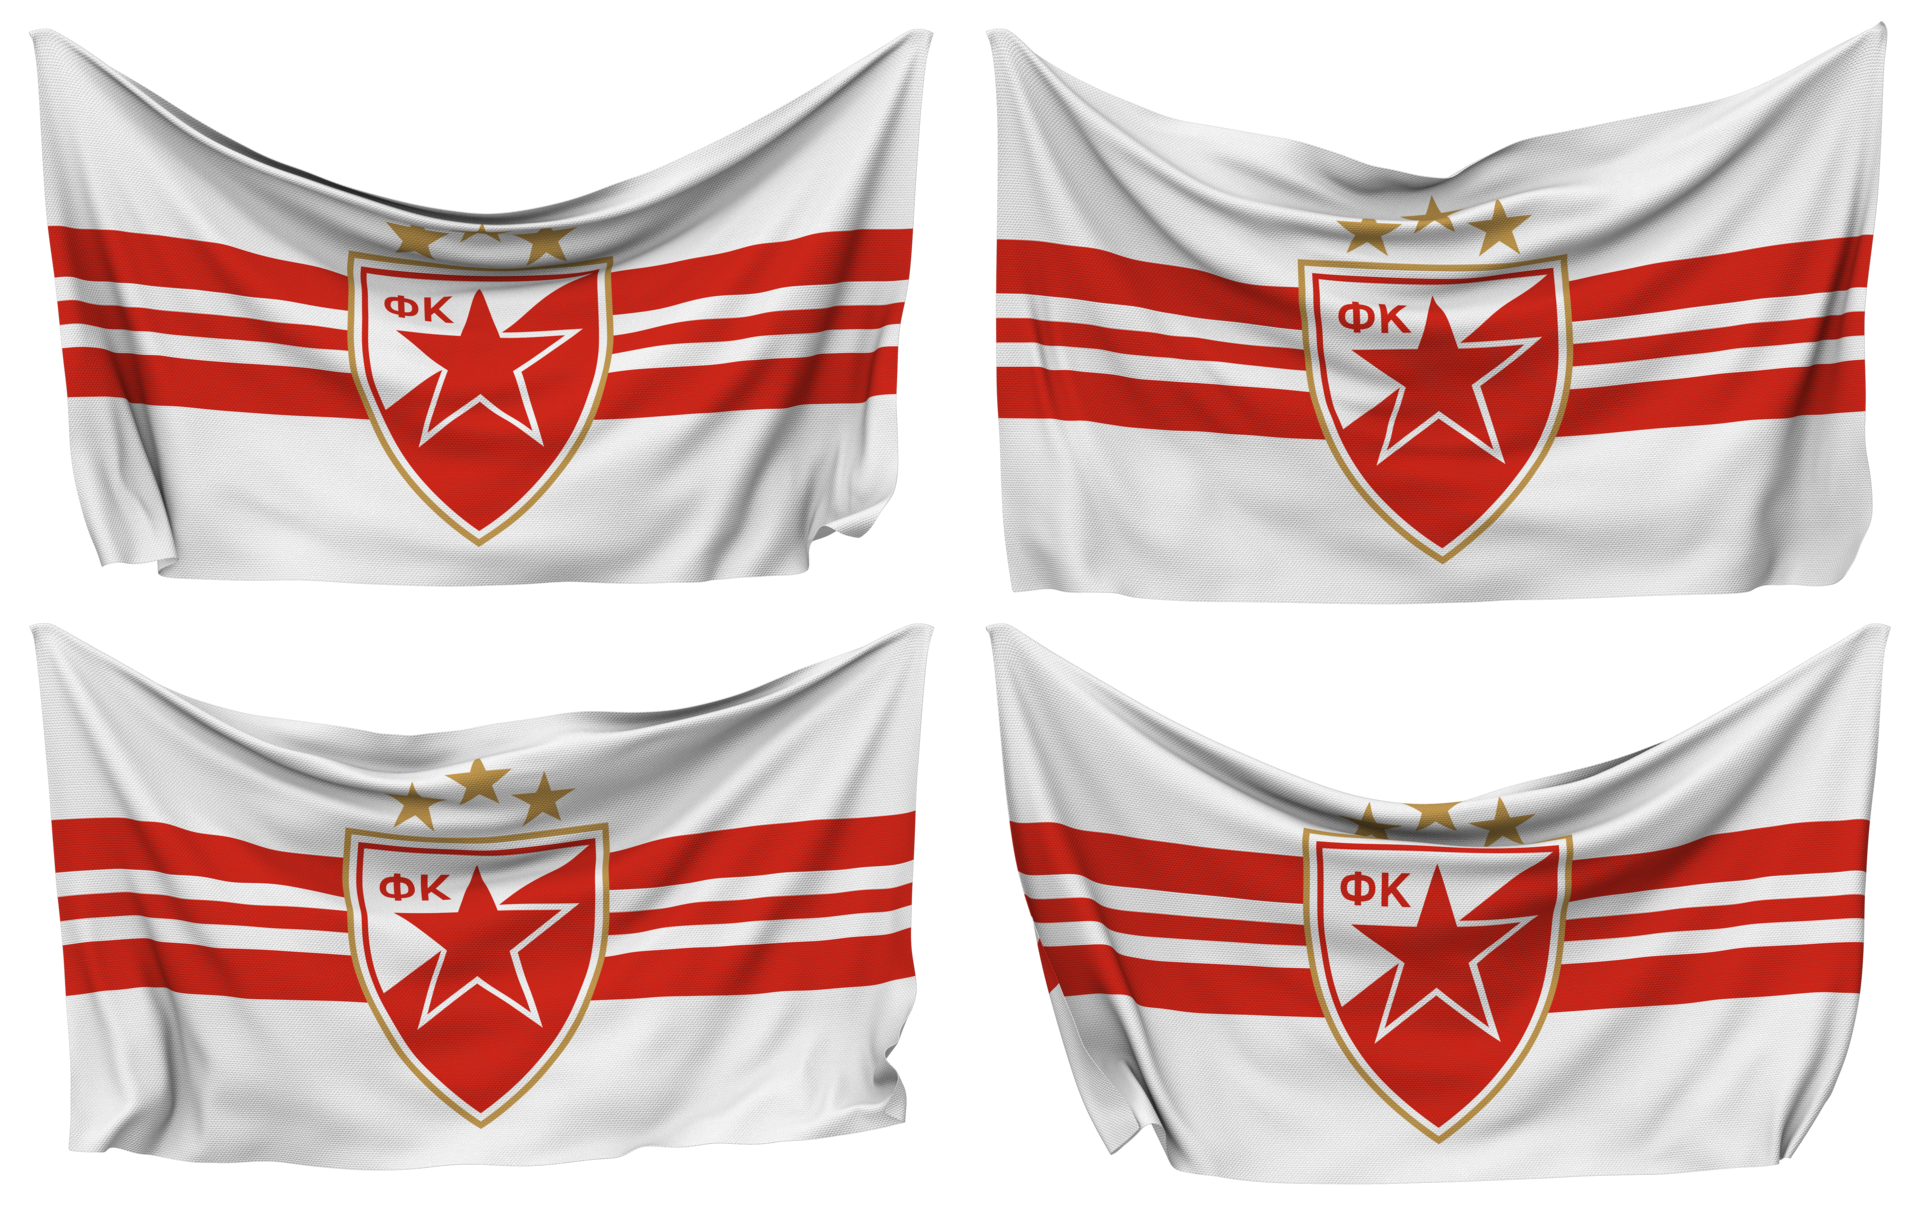 Fudbalski klub Crvena zvezda Pinned Flag from Corners, Isolated with  Different Waving Variations, 3D Rendering 24798228 PNG